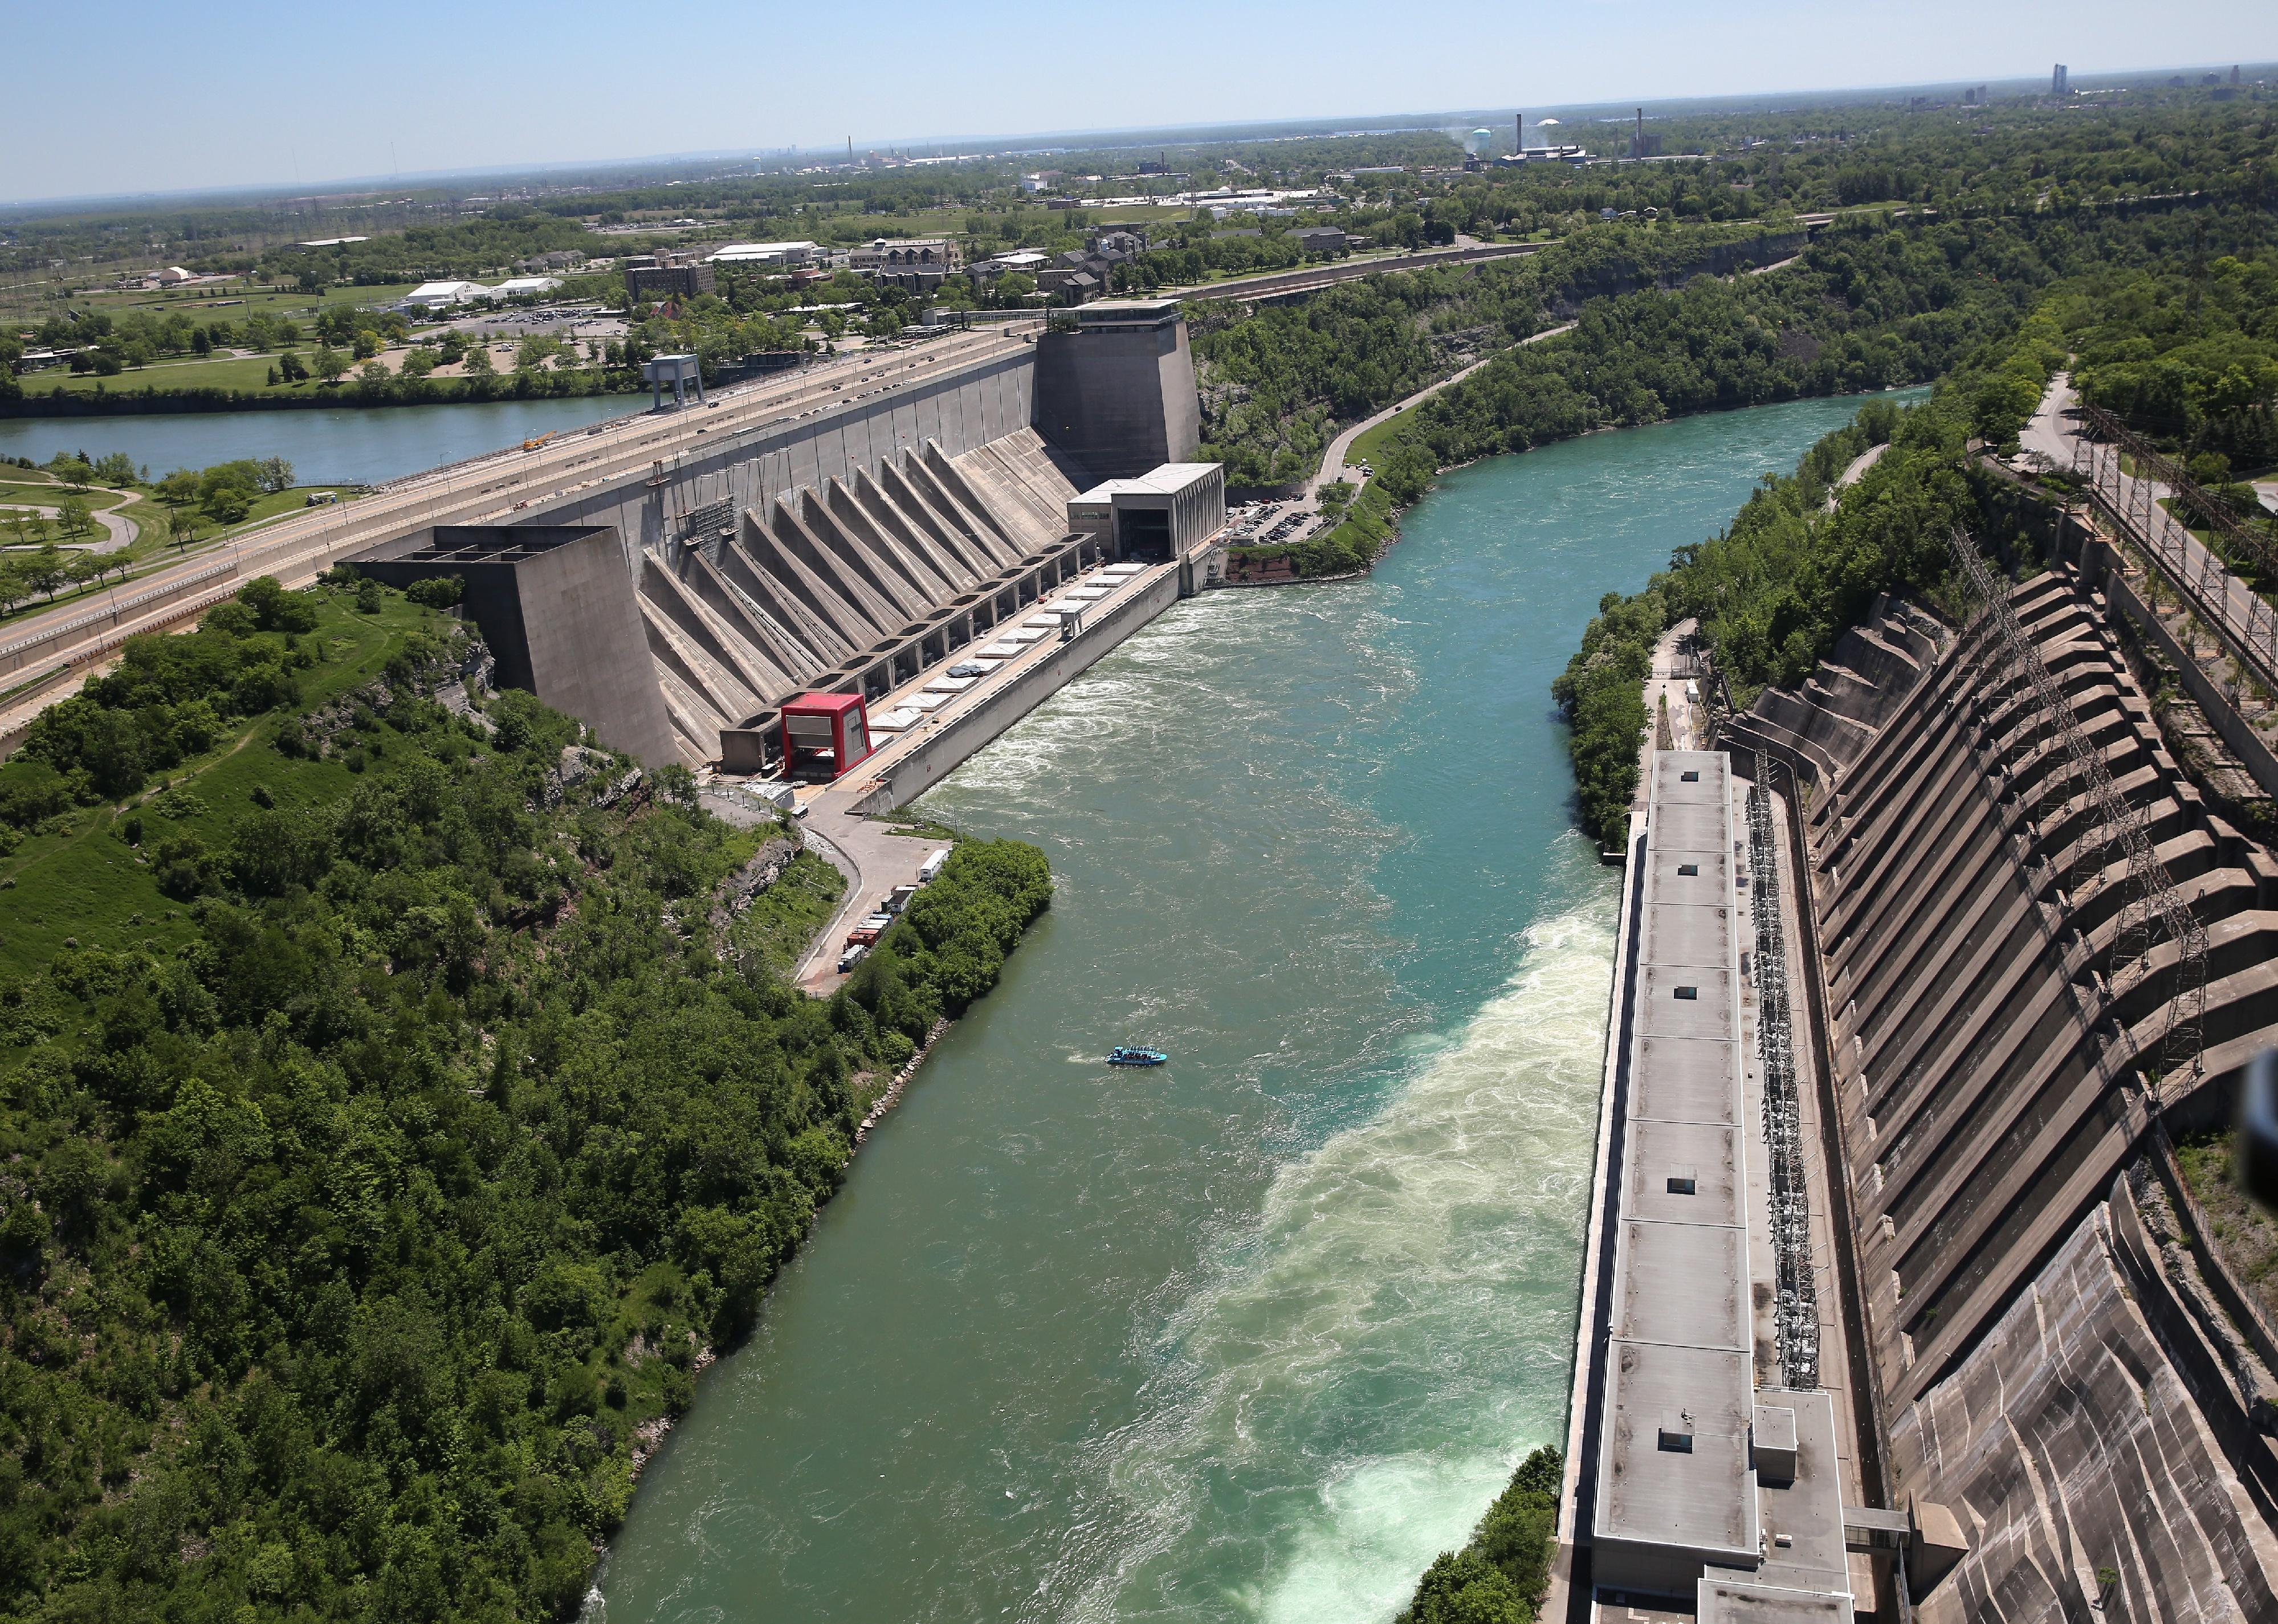 Water from the Niagara River passing through a hydroelectric dam in New York.